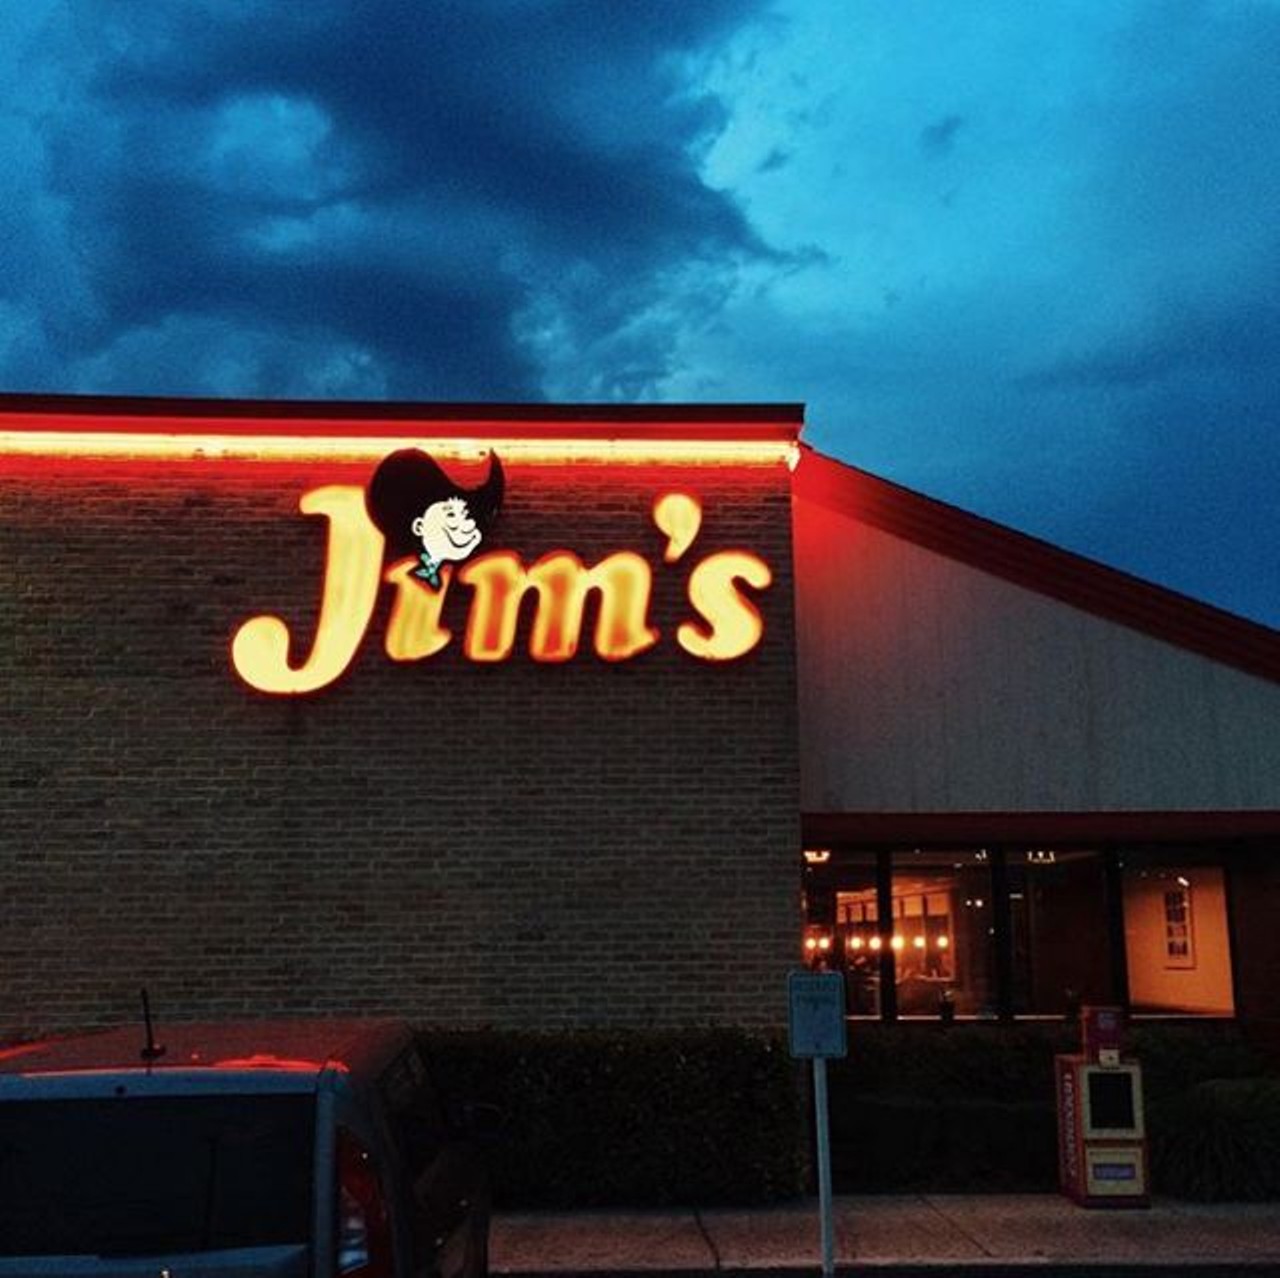 Jim’s
Multiple locations, jimsrestaurants.com
With the purchase of an adult entree, kids can eat free Sunday and Monday from 5 to 9 p.m. Dinner time just got so much easier.
Photo via Instagram / onlyoncaturdays